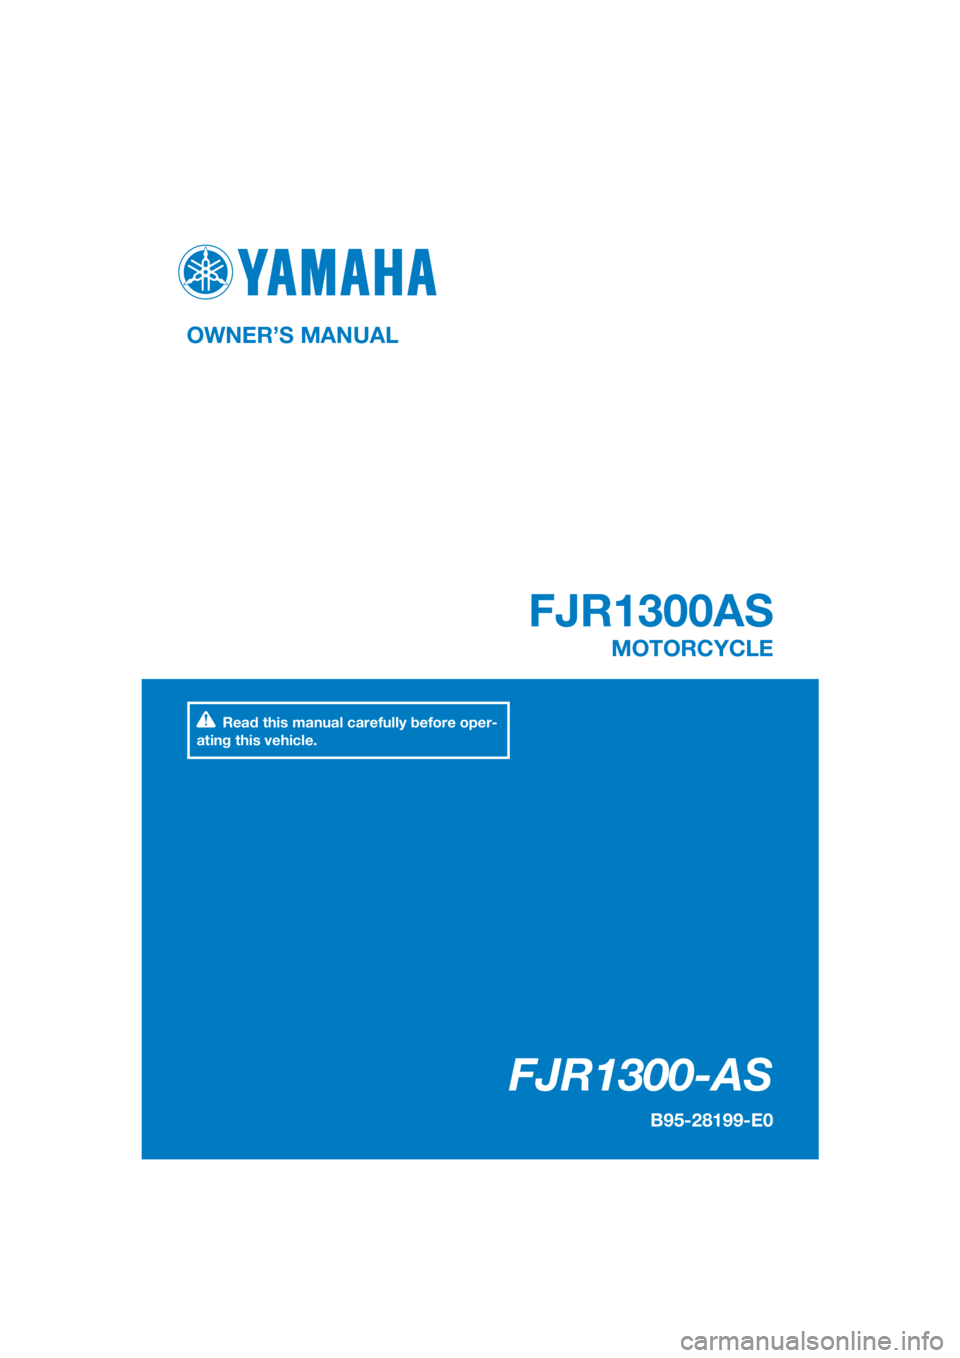 YAMAHA FJR1300AS 2016  Owners Manual DIC183
FJR1300-AS
FJR1300AS
OWNER’S MANUAL
B95-28199-E0
MOTORCYCLE
[English  (E)]
Read this manual carefully before oper-
ating this vehicle. 